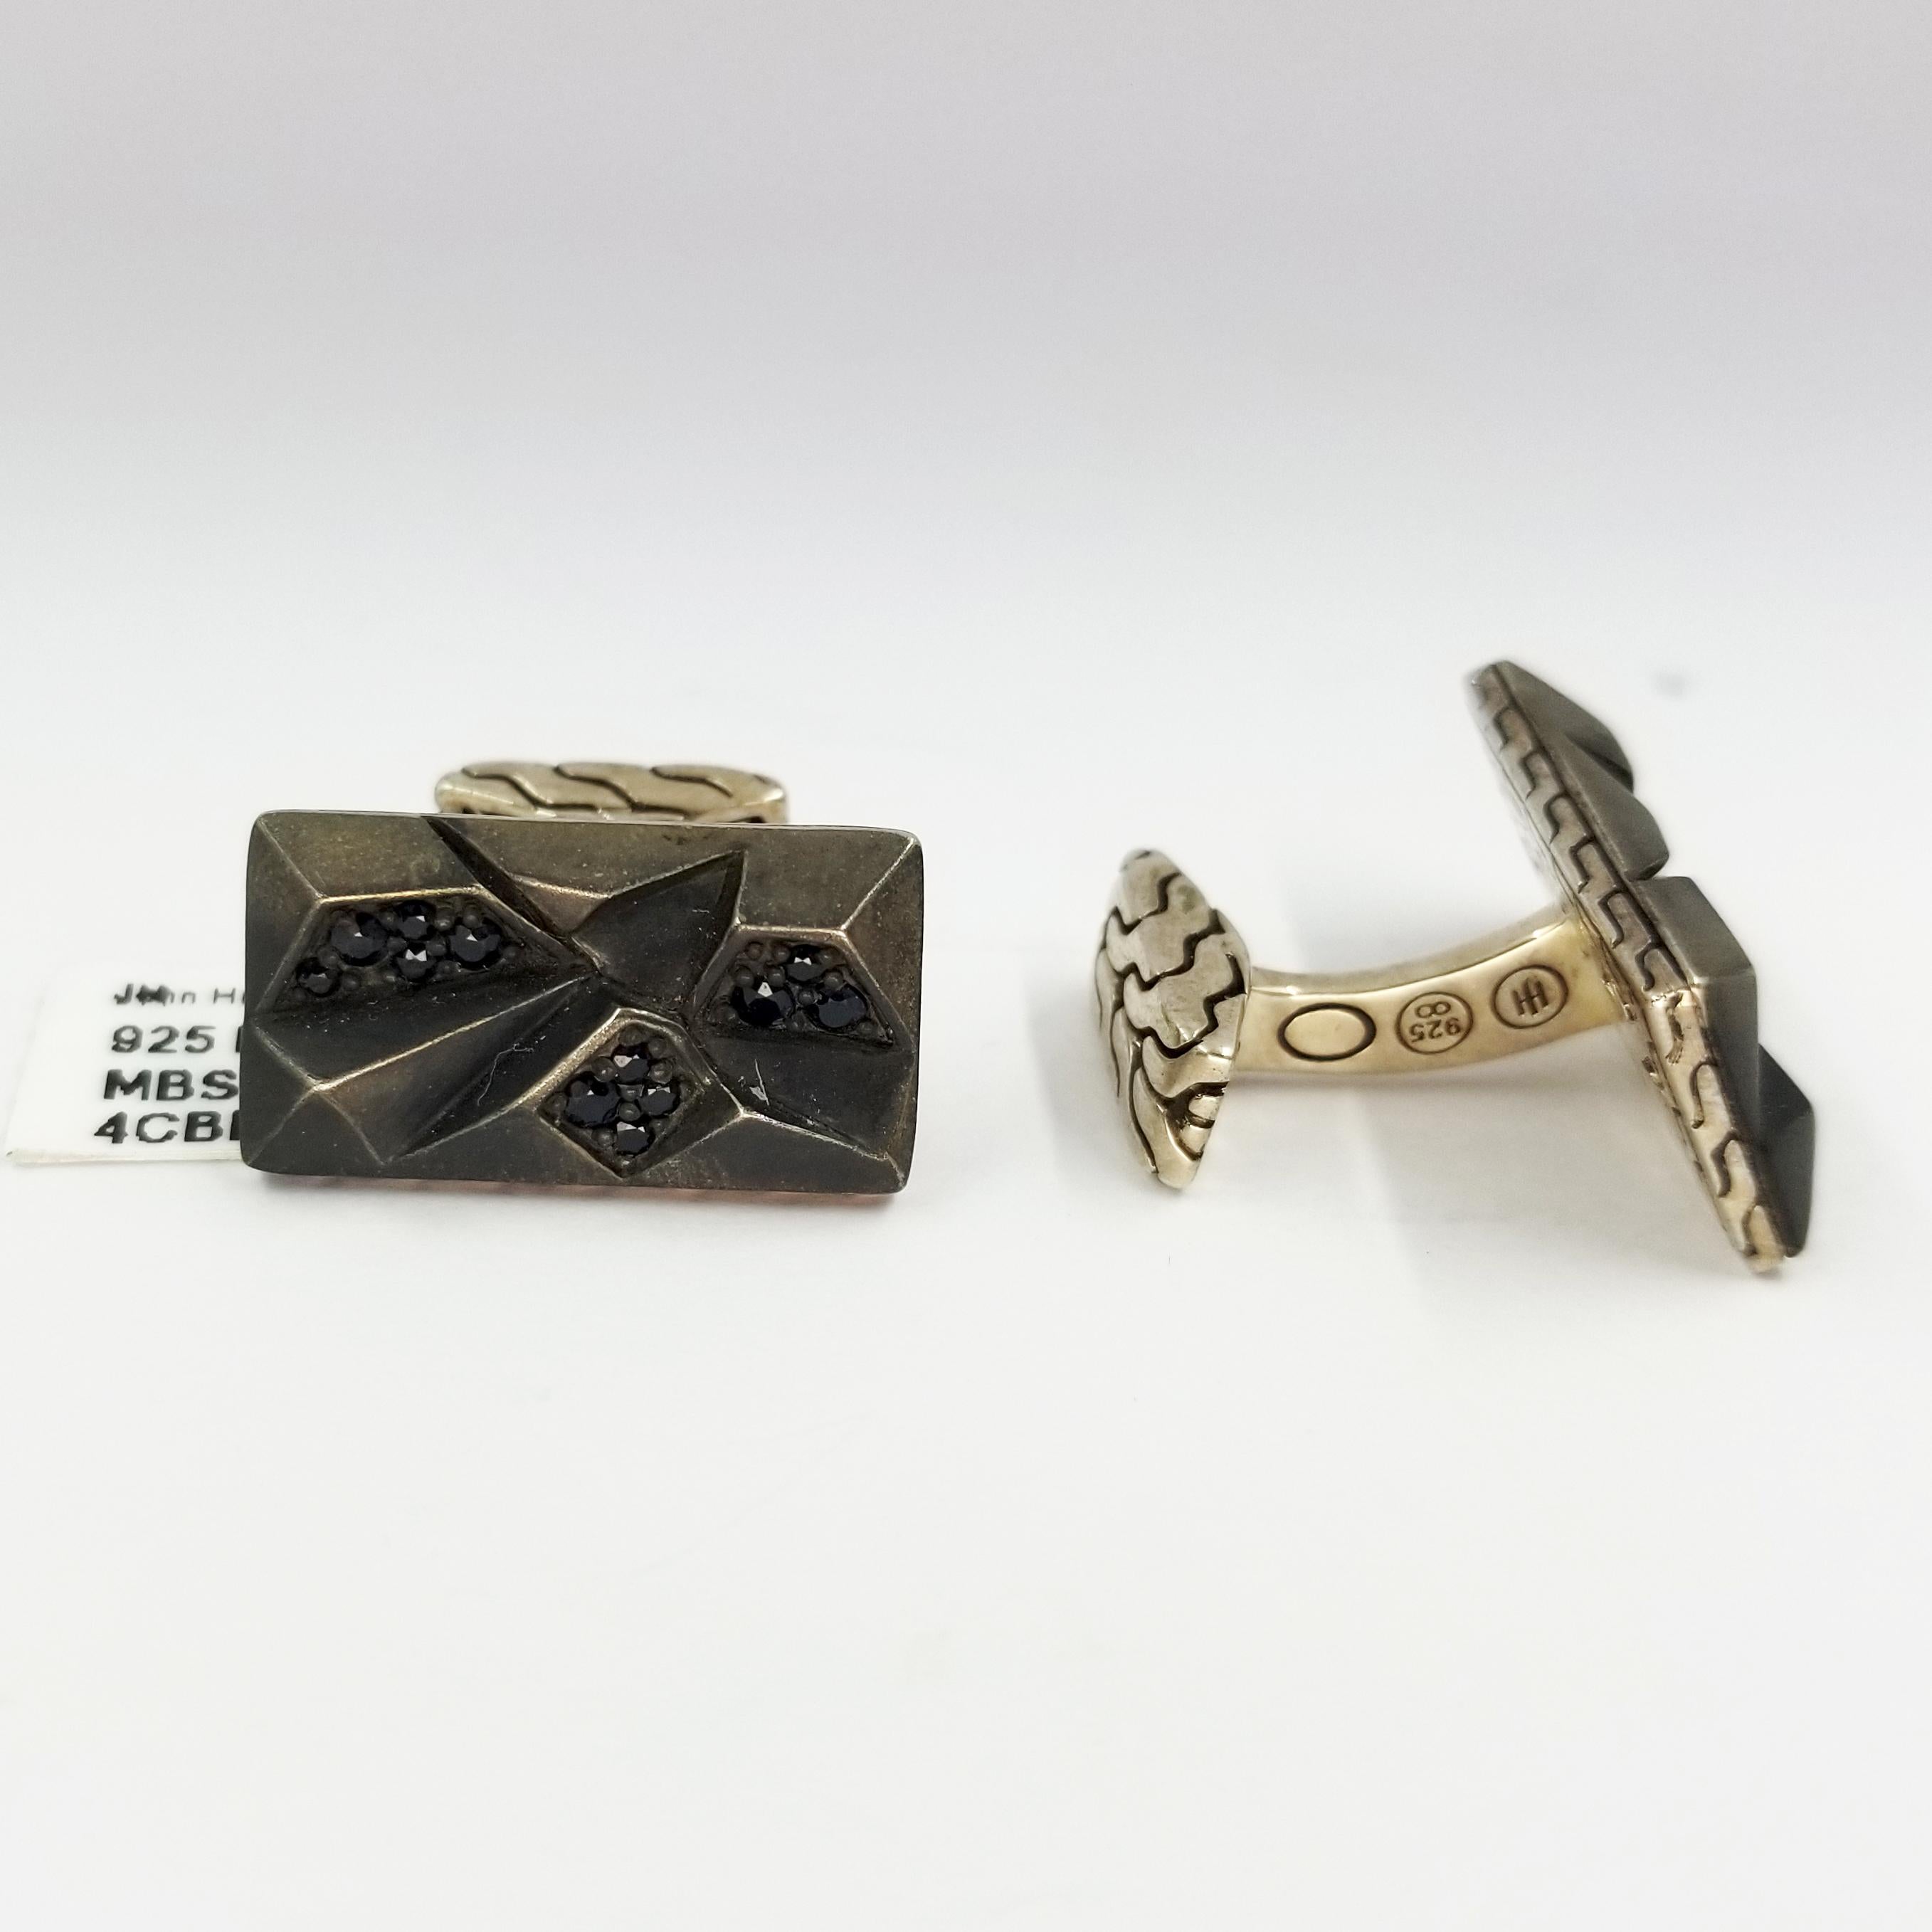 NEW Sterling Silver Cufflinks from Fine Jeweler, John Hardy in Bali
Rectangular Top Design with Classic Chain Motif Set with Faceted Black Sapphires
Black Antique Finish
Torpedo Style Backs
Stamped: JH JOHN HARDY 925
Comes with original pouch,